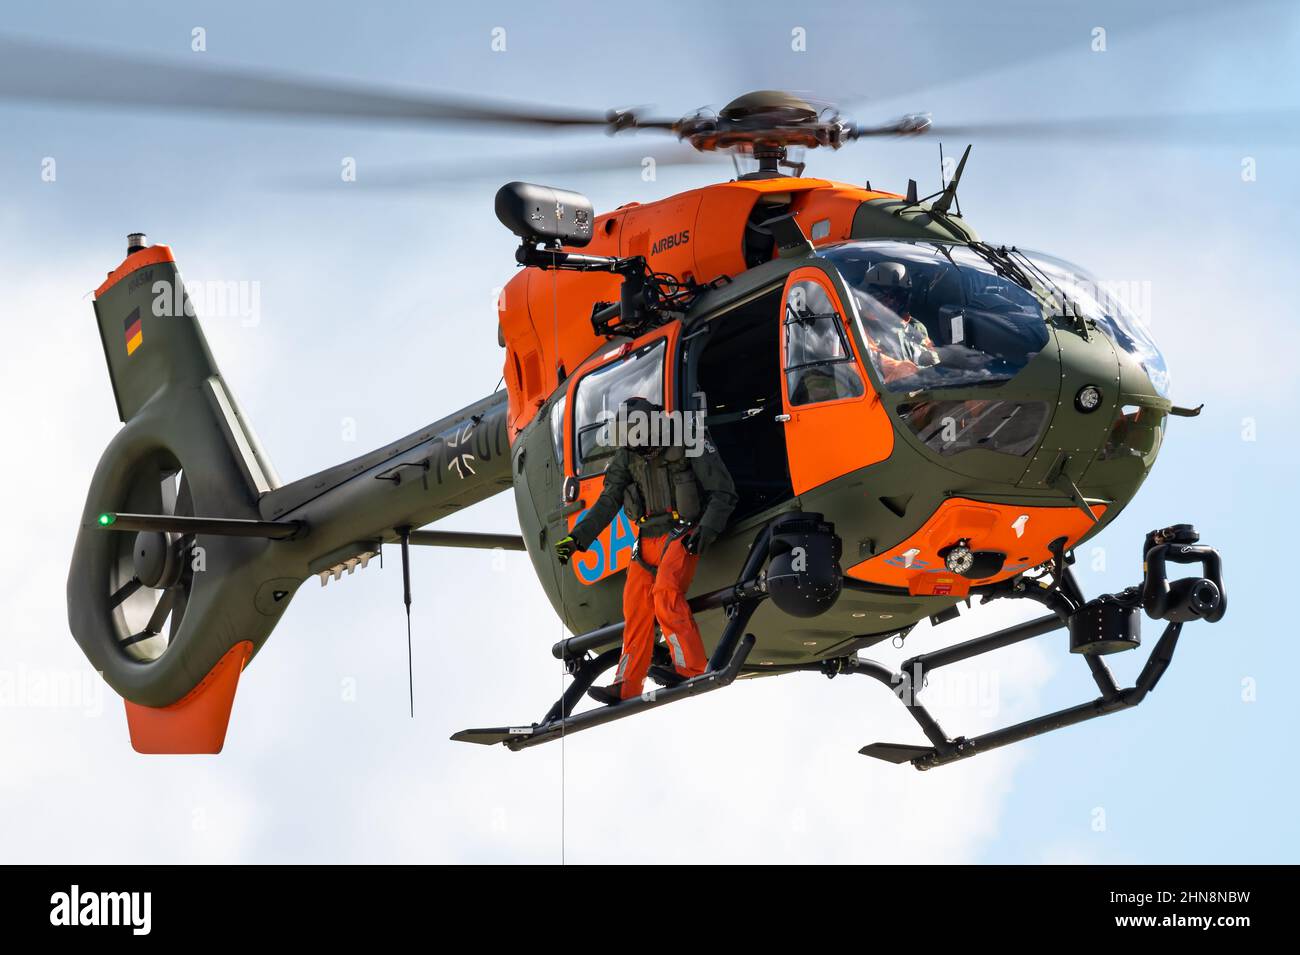 An Airbus H145M search and rescue helicopter of the German Army Aviation Corps. Stock Photo